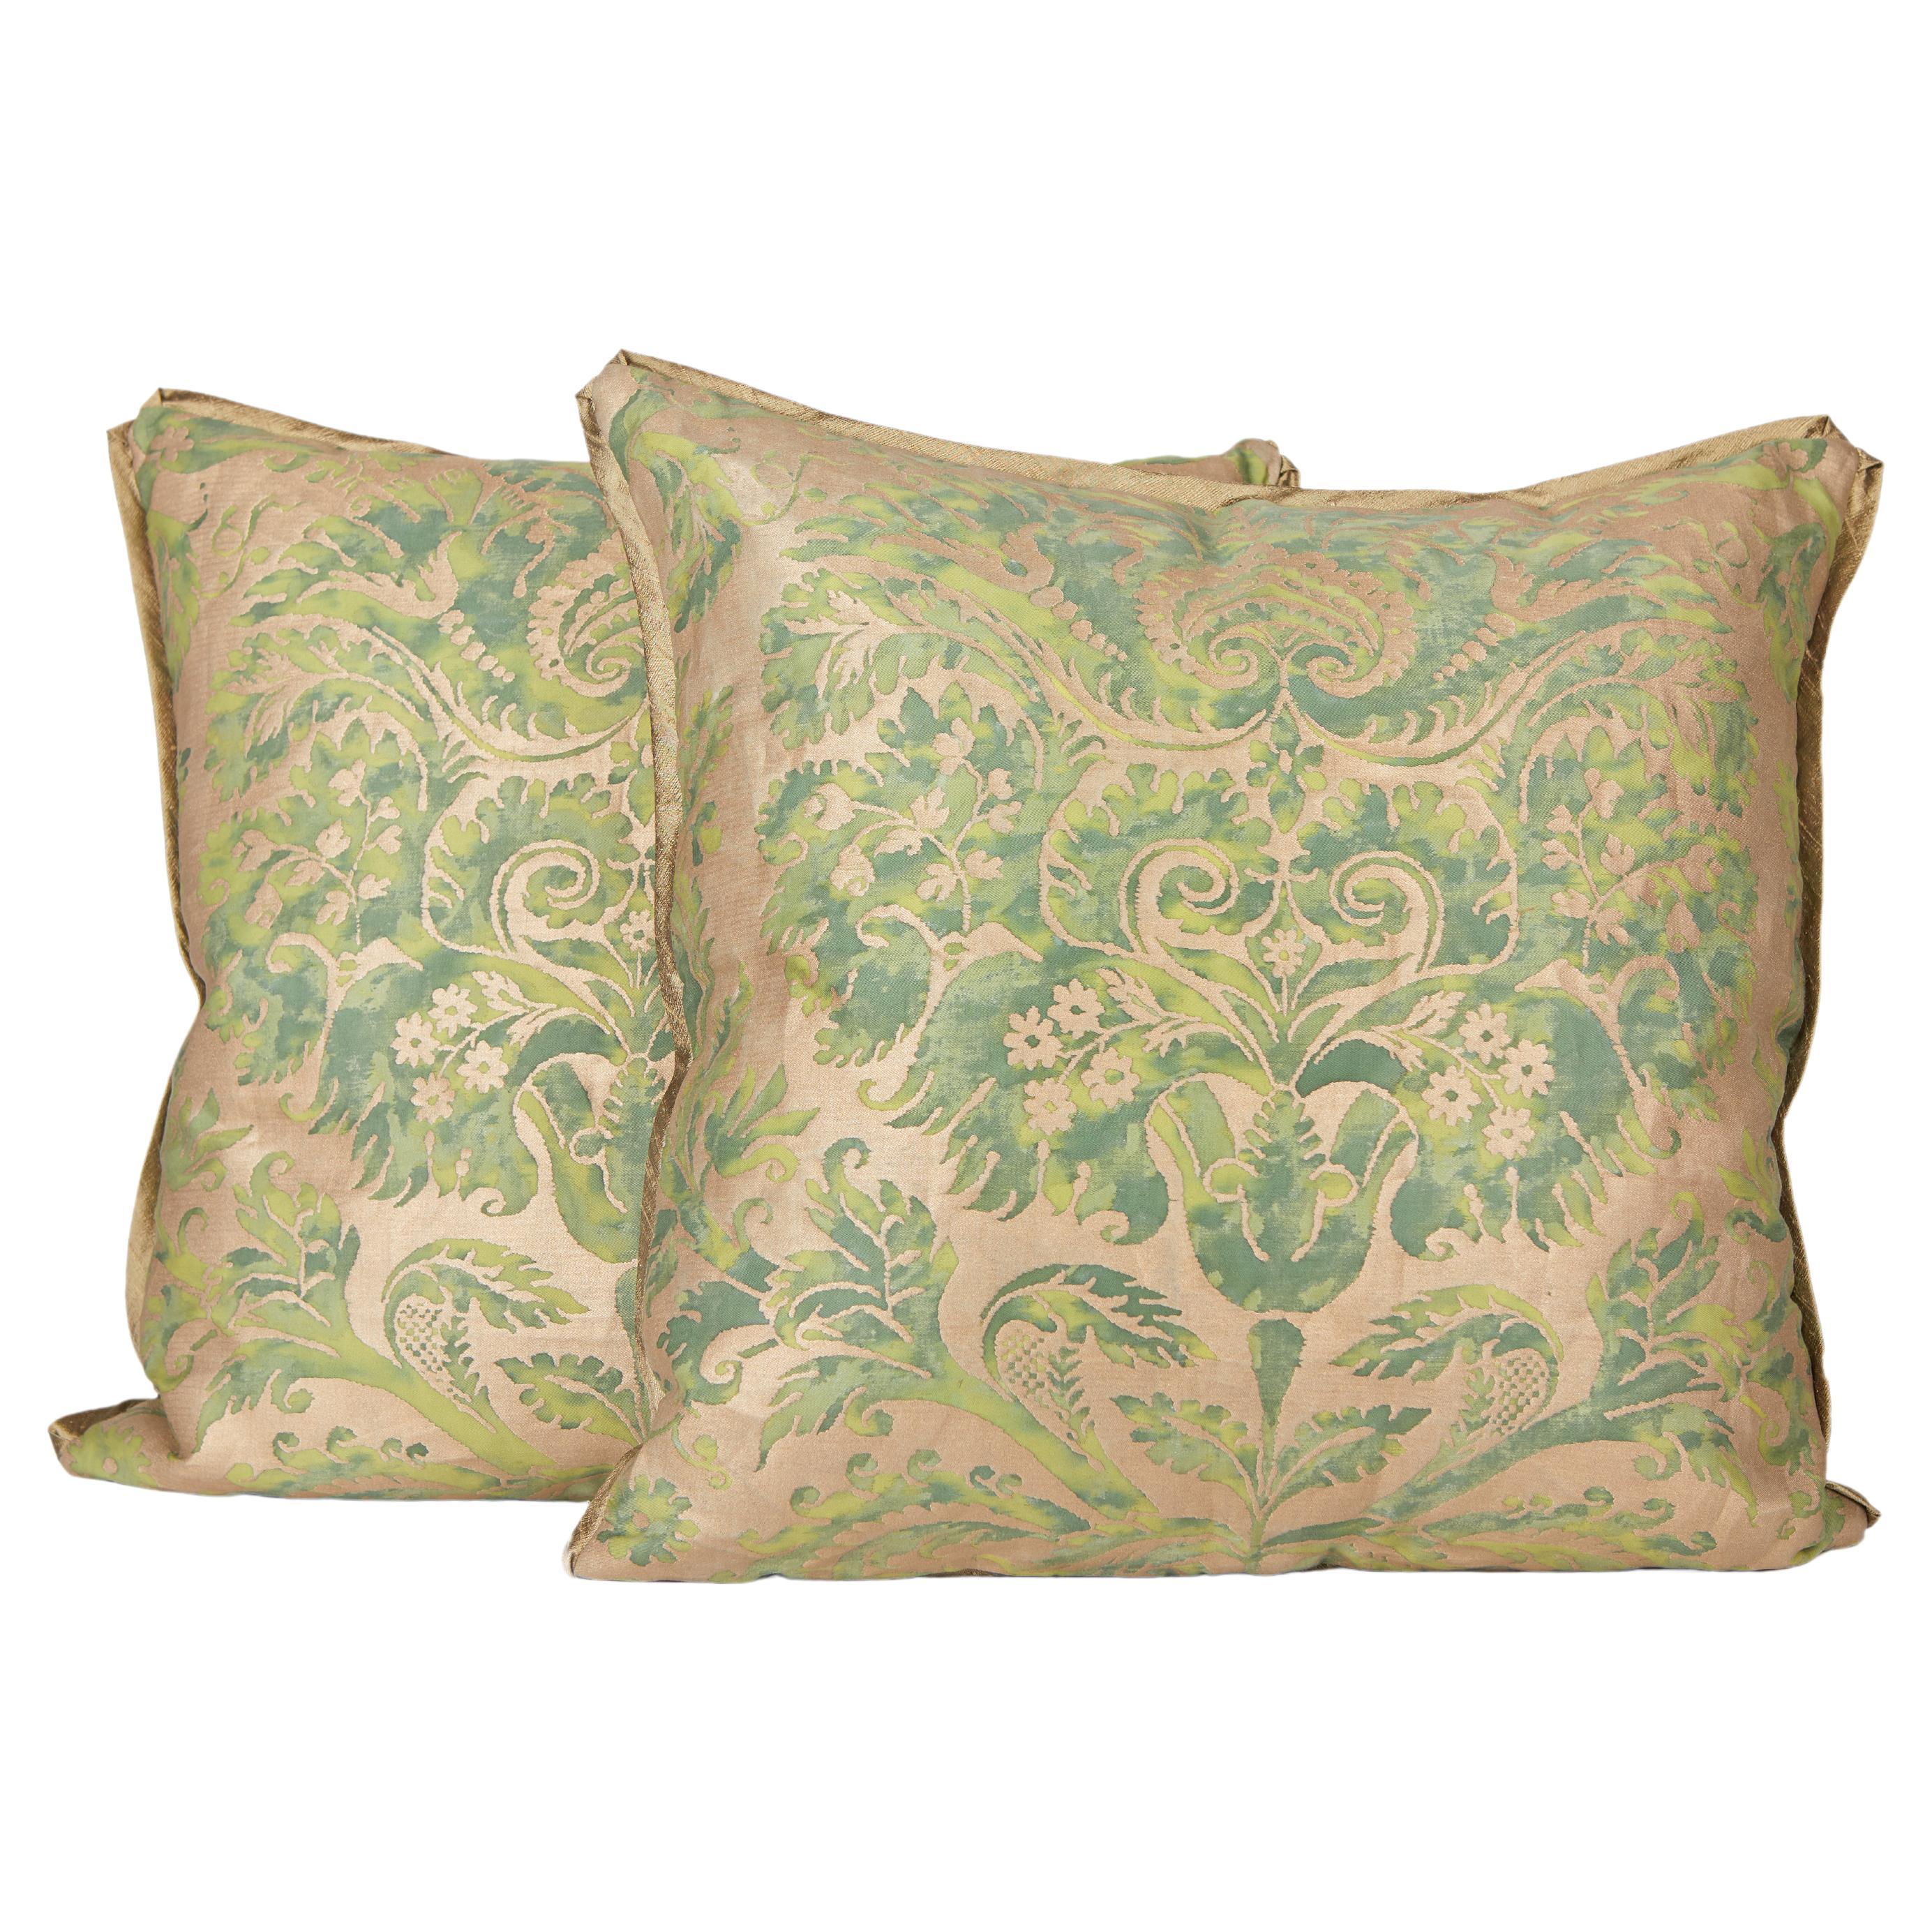 Pair of Fortuny Fabric Cushions in the Demedici Pattern, Green and Silvery Gold For Sale